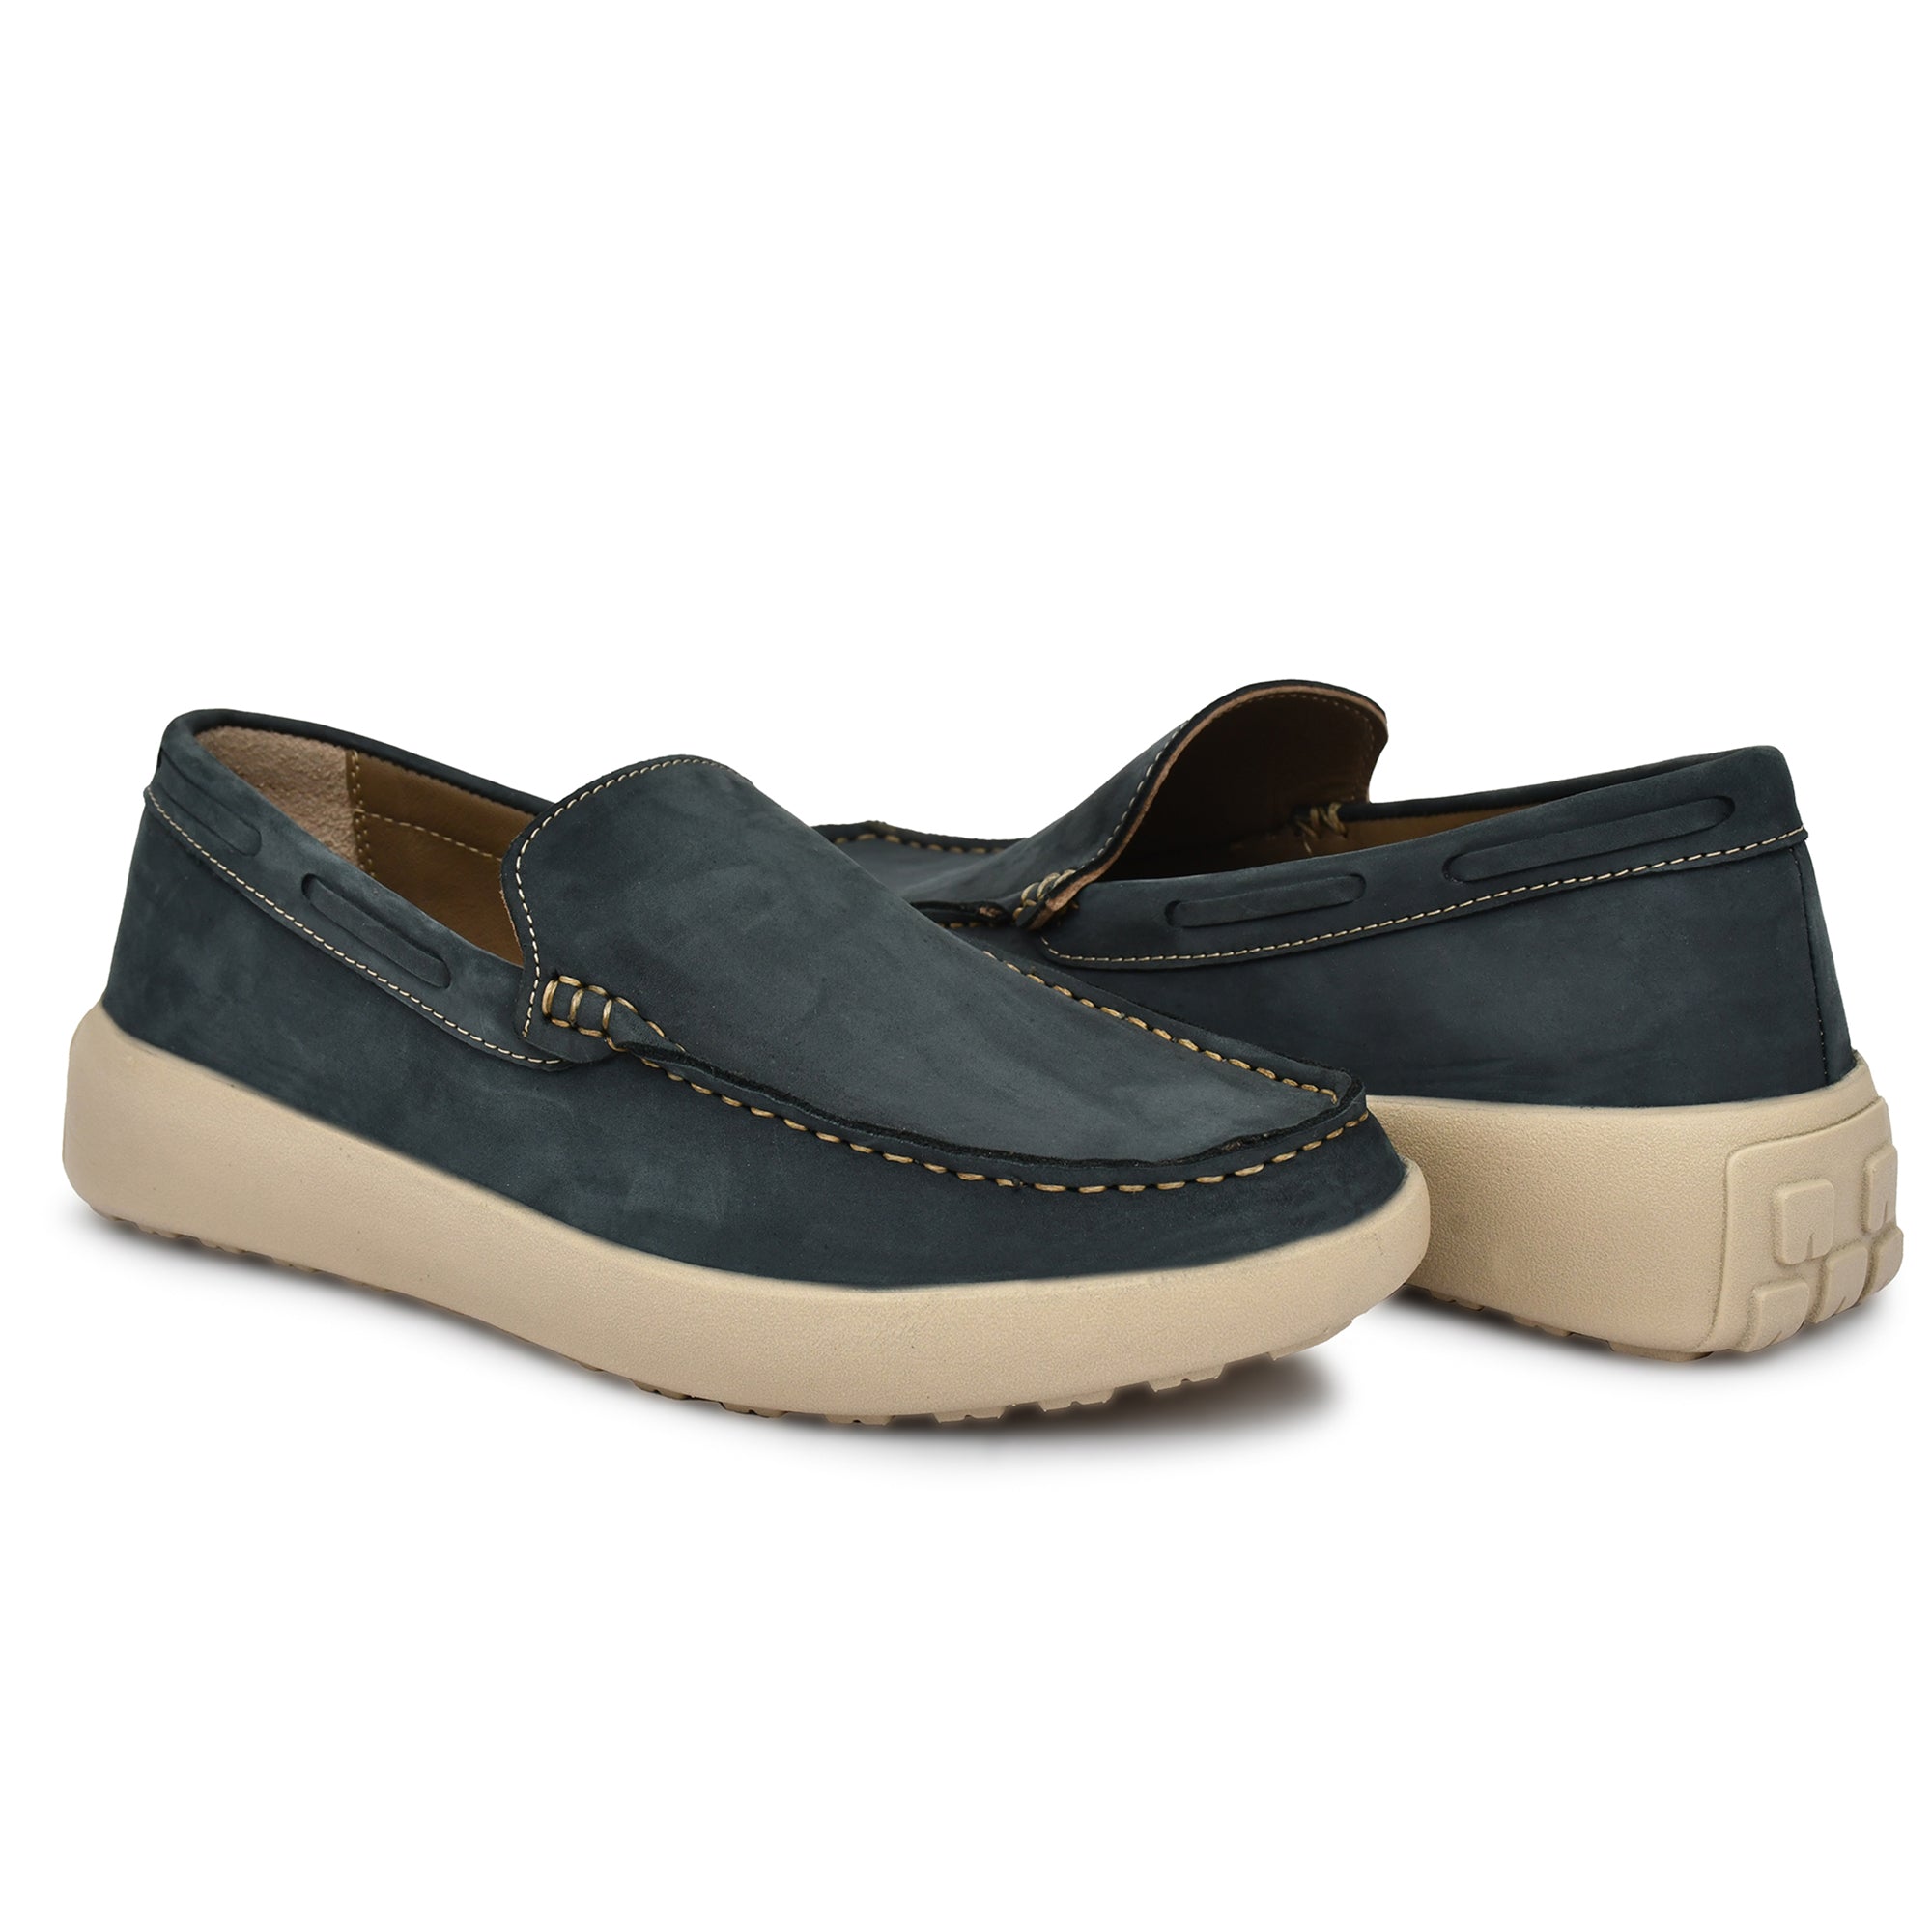 Leather Loafers for men's